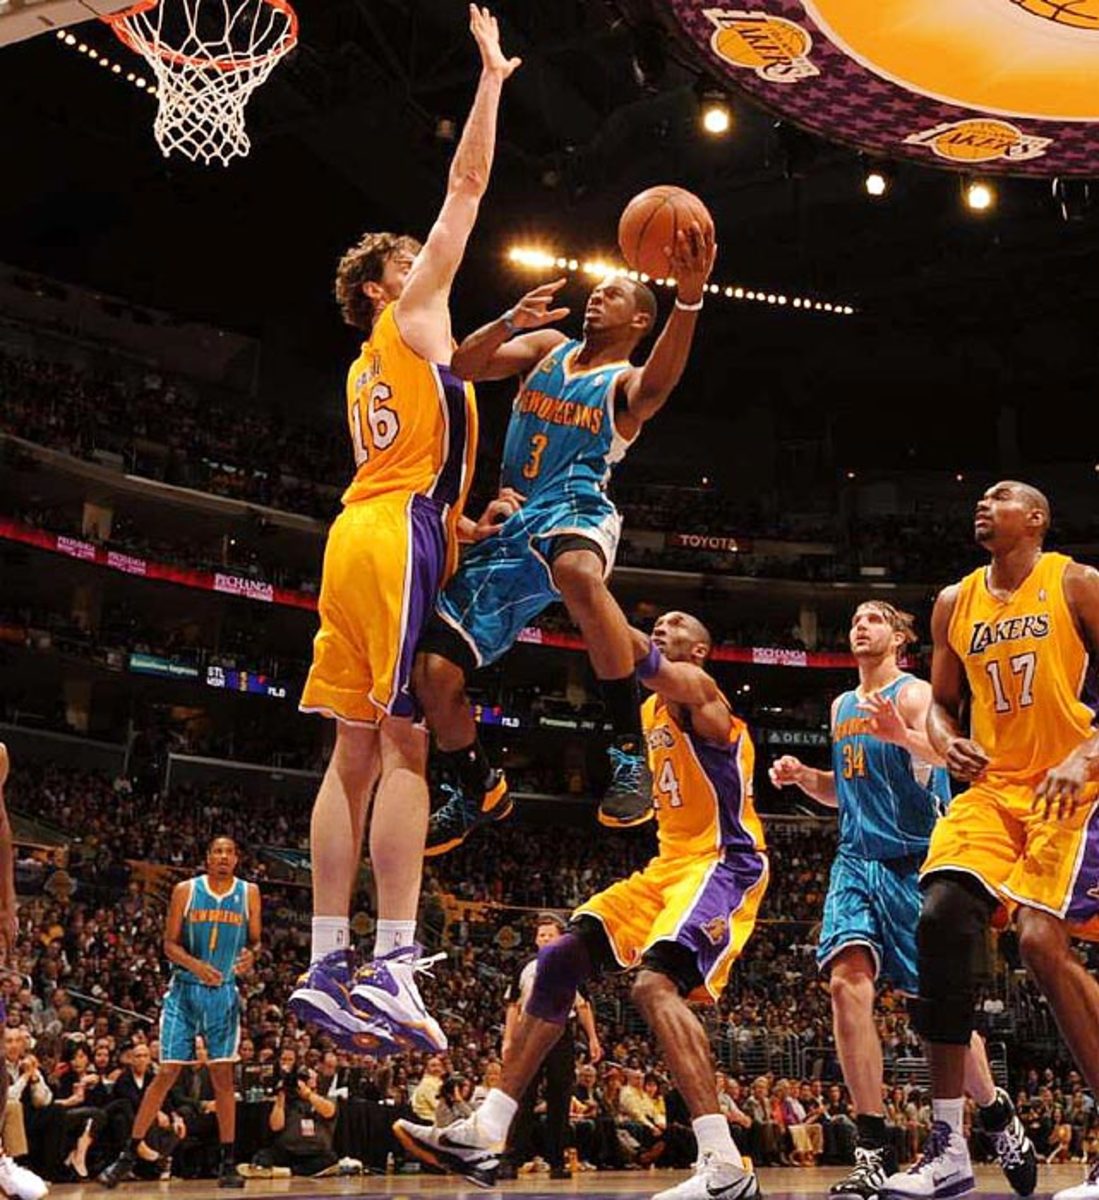 lakers-hornets-opy2-144406-mid.jpg